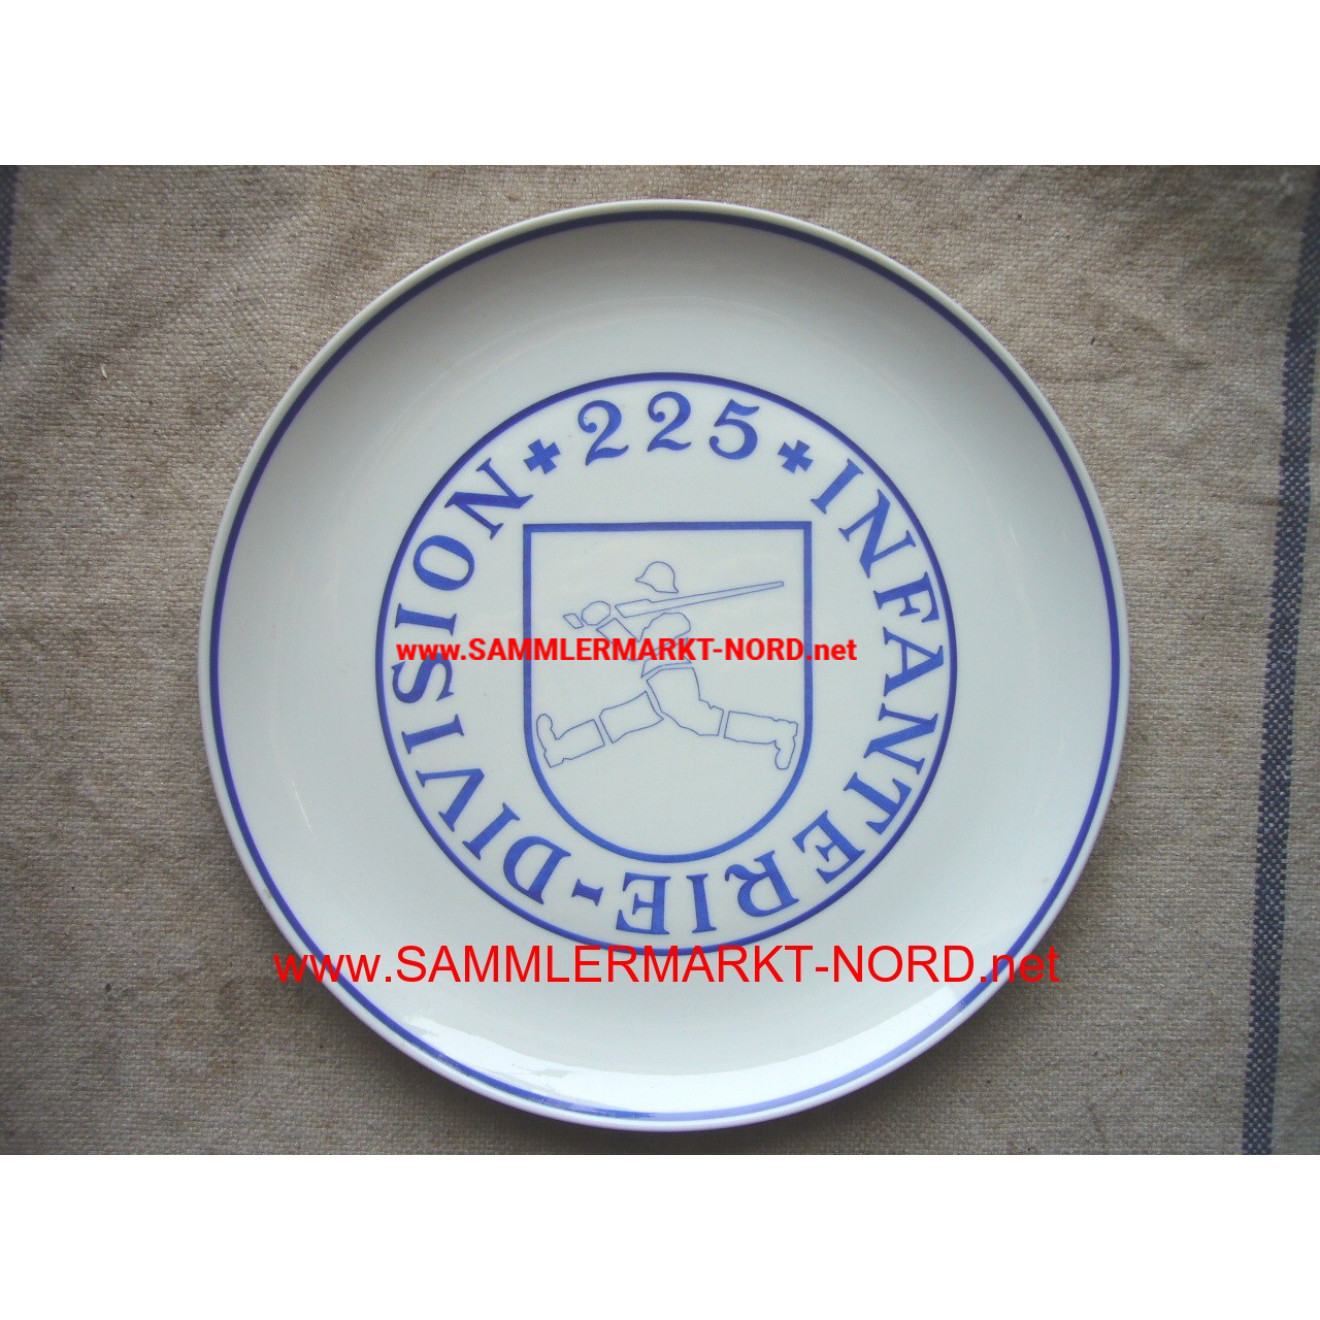 Commemorative plate of the 225th Infantry Division